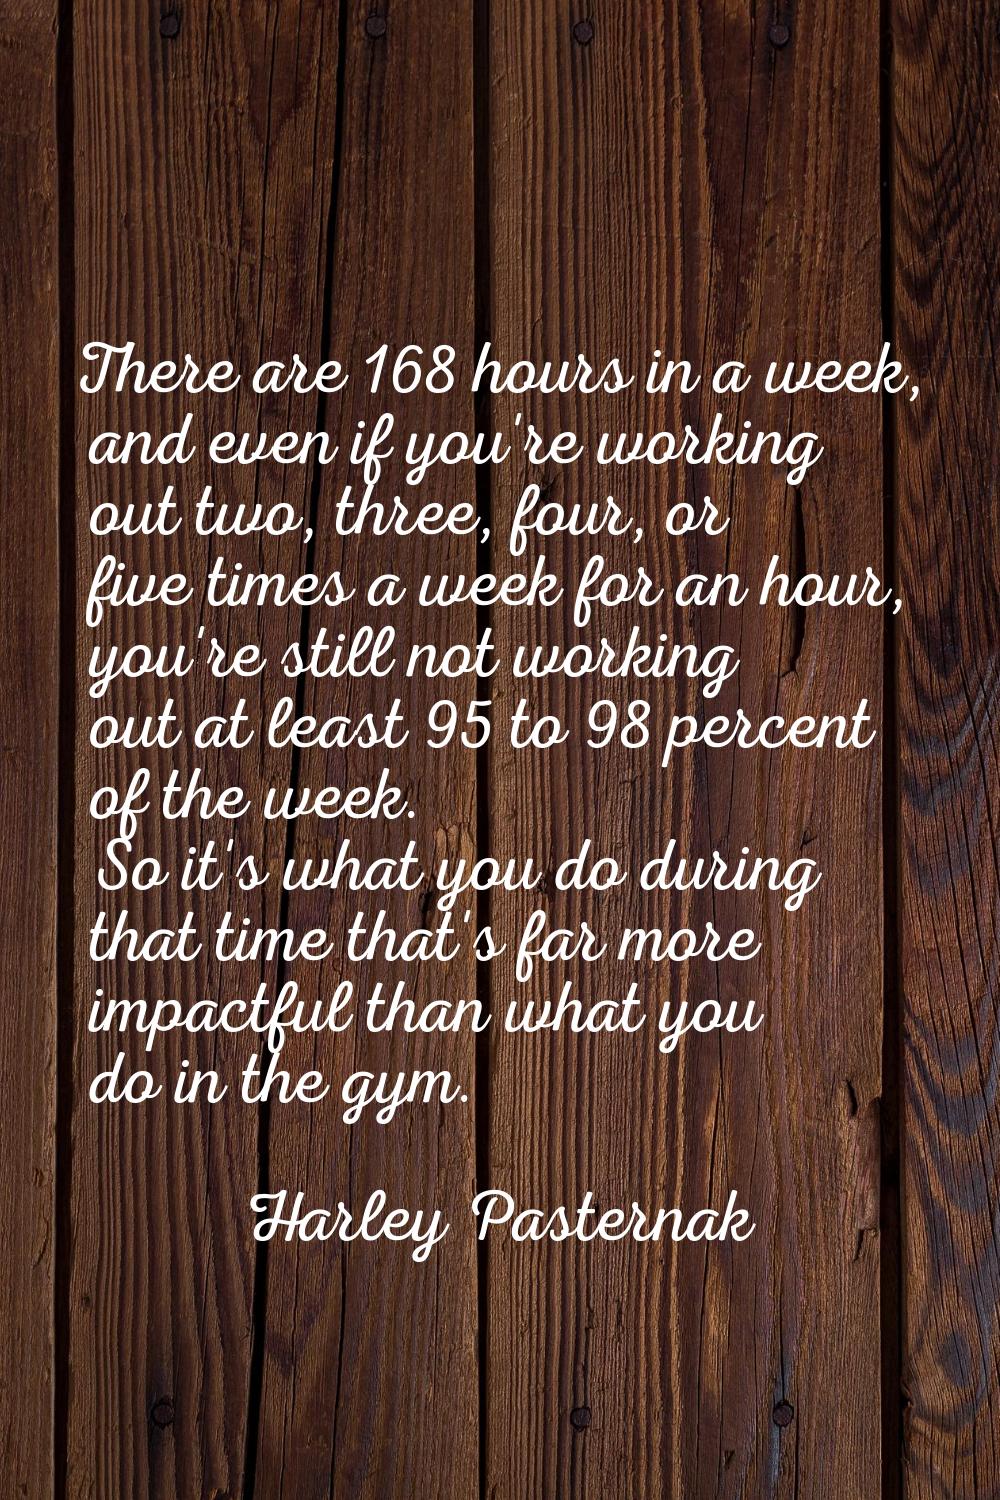 There are 168 hours in a week, and even if you're working out two, three, four, or five times a wee